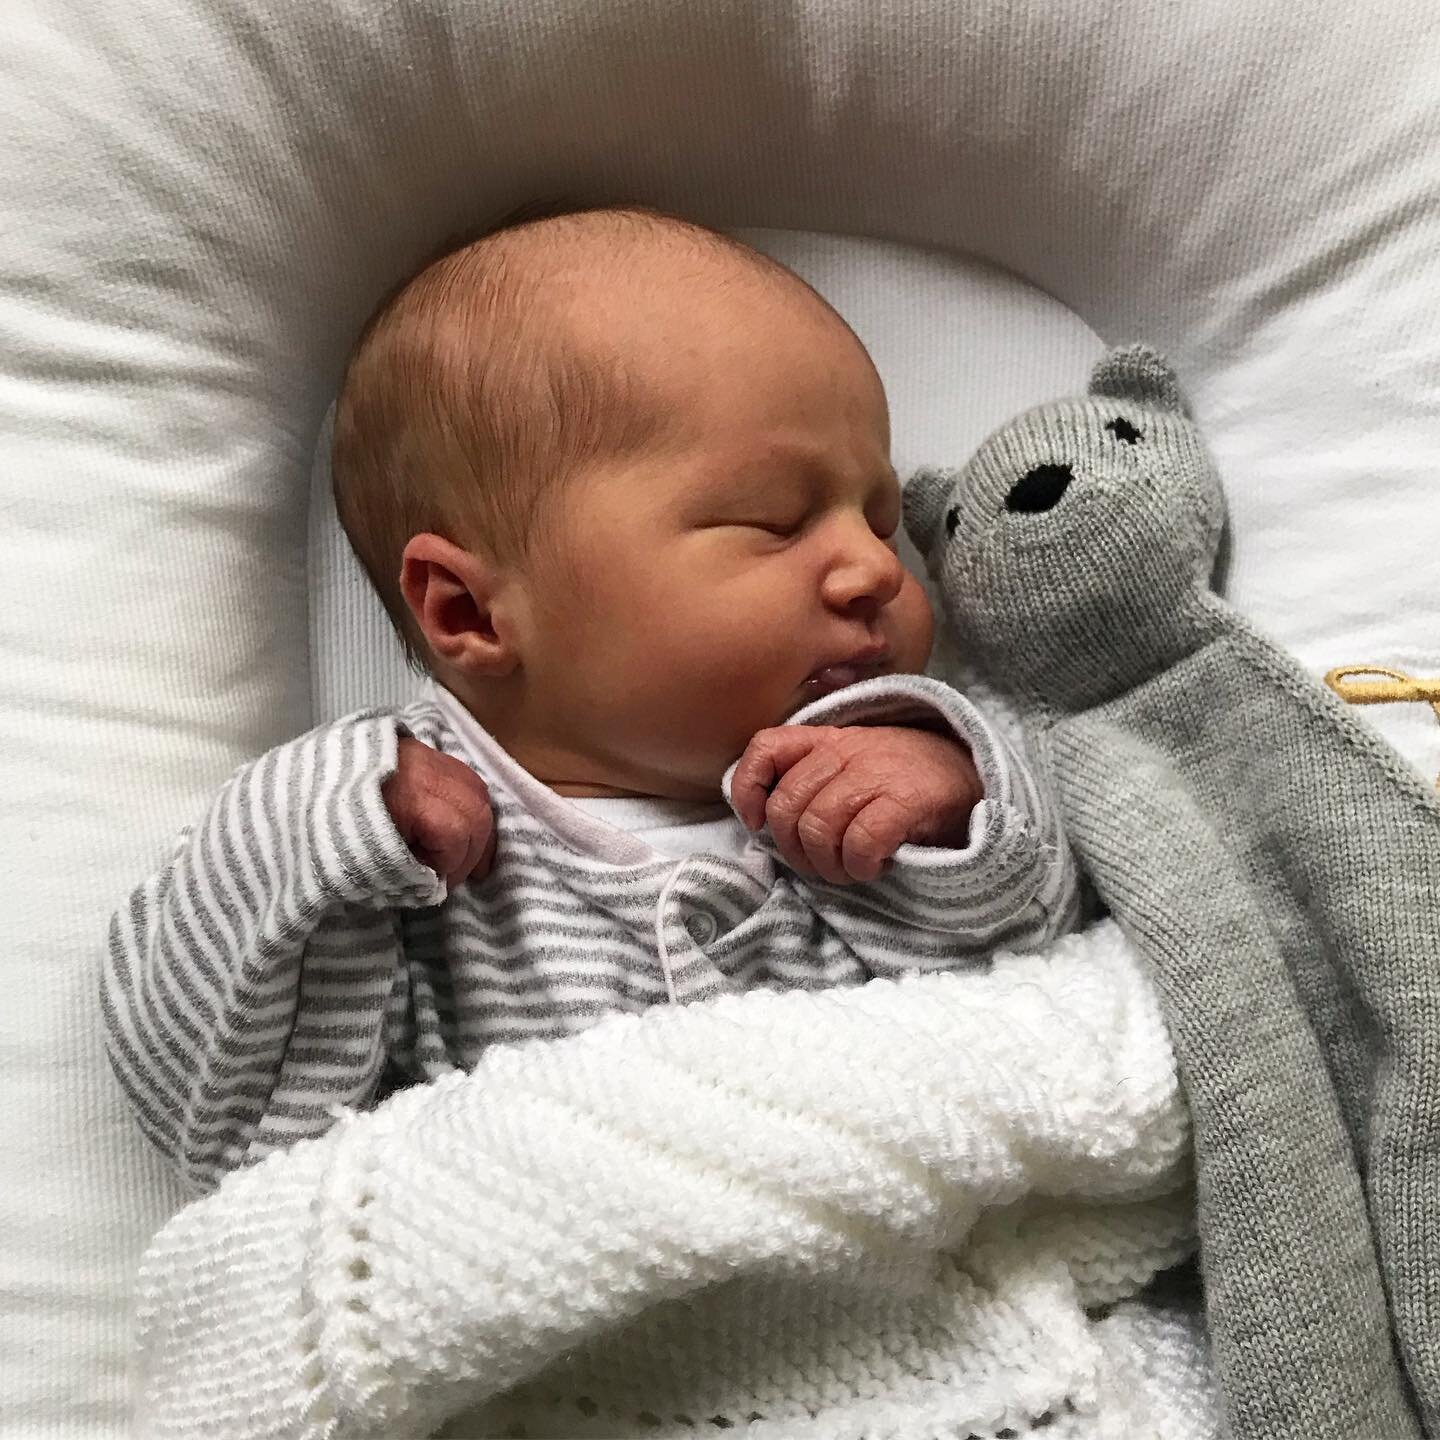 Exactly one week since our little girl came into the world - healthy, happy and the most beautiful thing we have ever seen ✨

P.S Her name is Isla Beatrix! (Or at least until I change my mind again 😬)